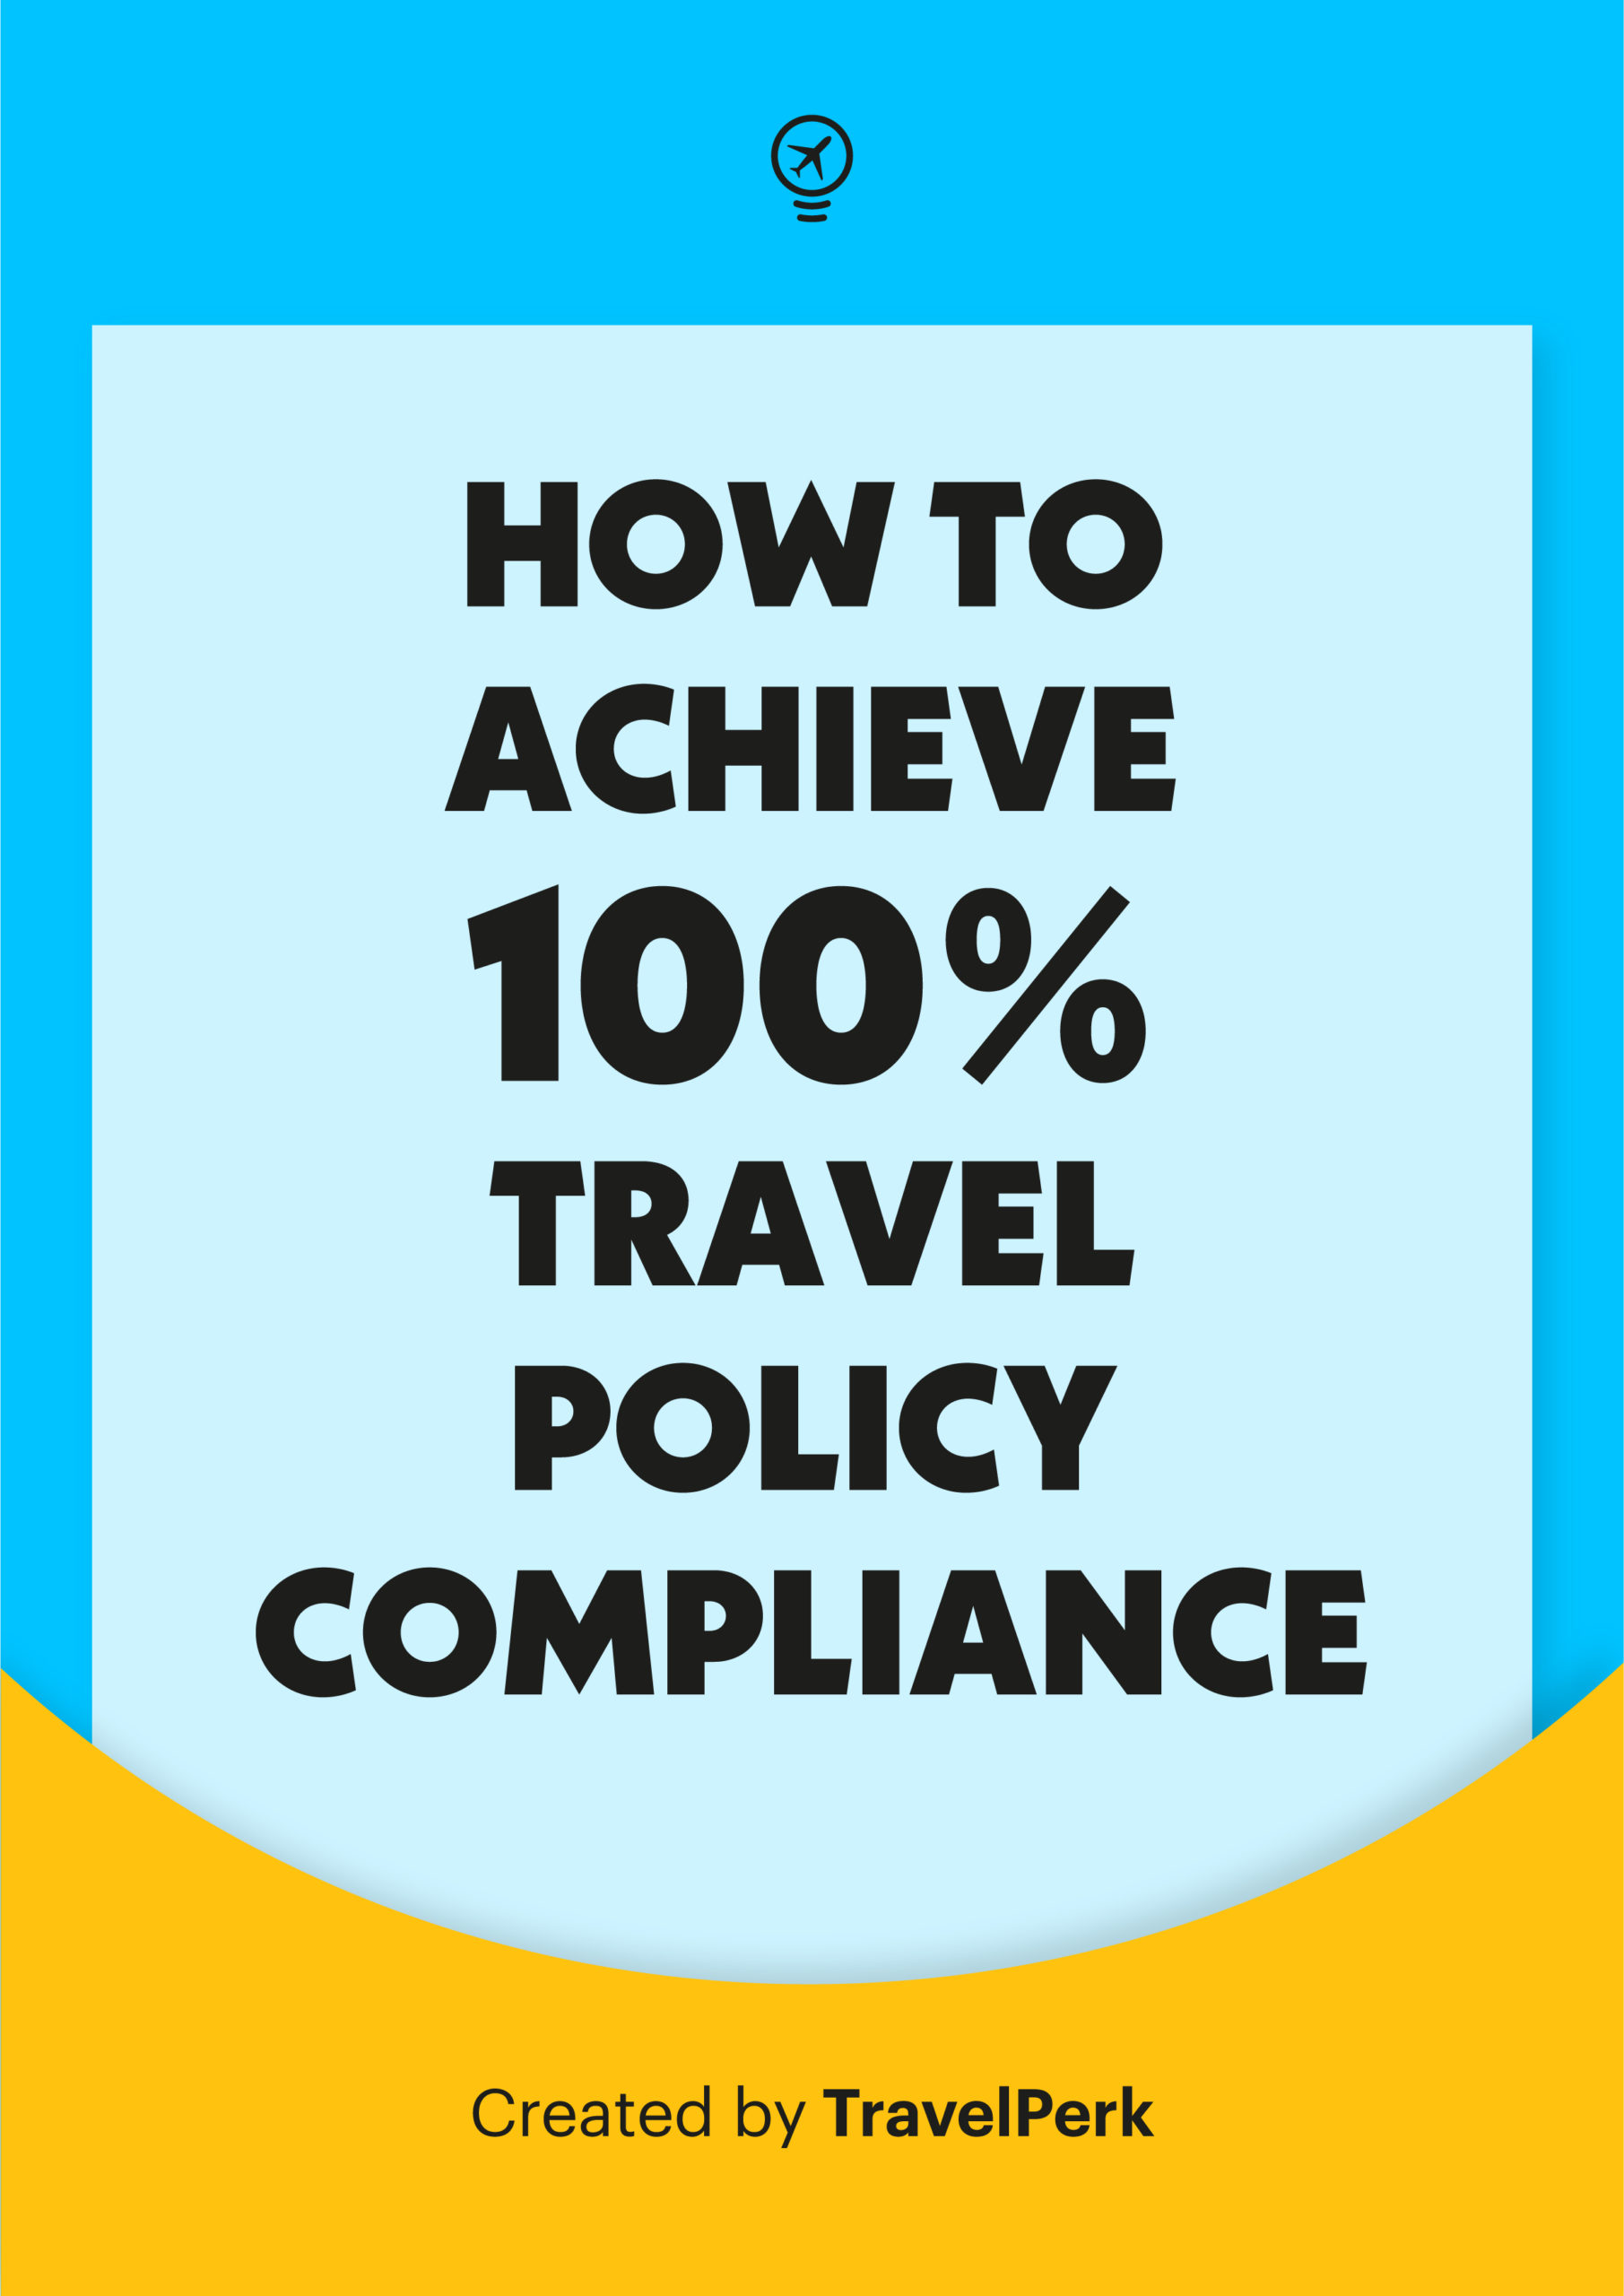 How to achieve 100% travel policy compliance